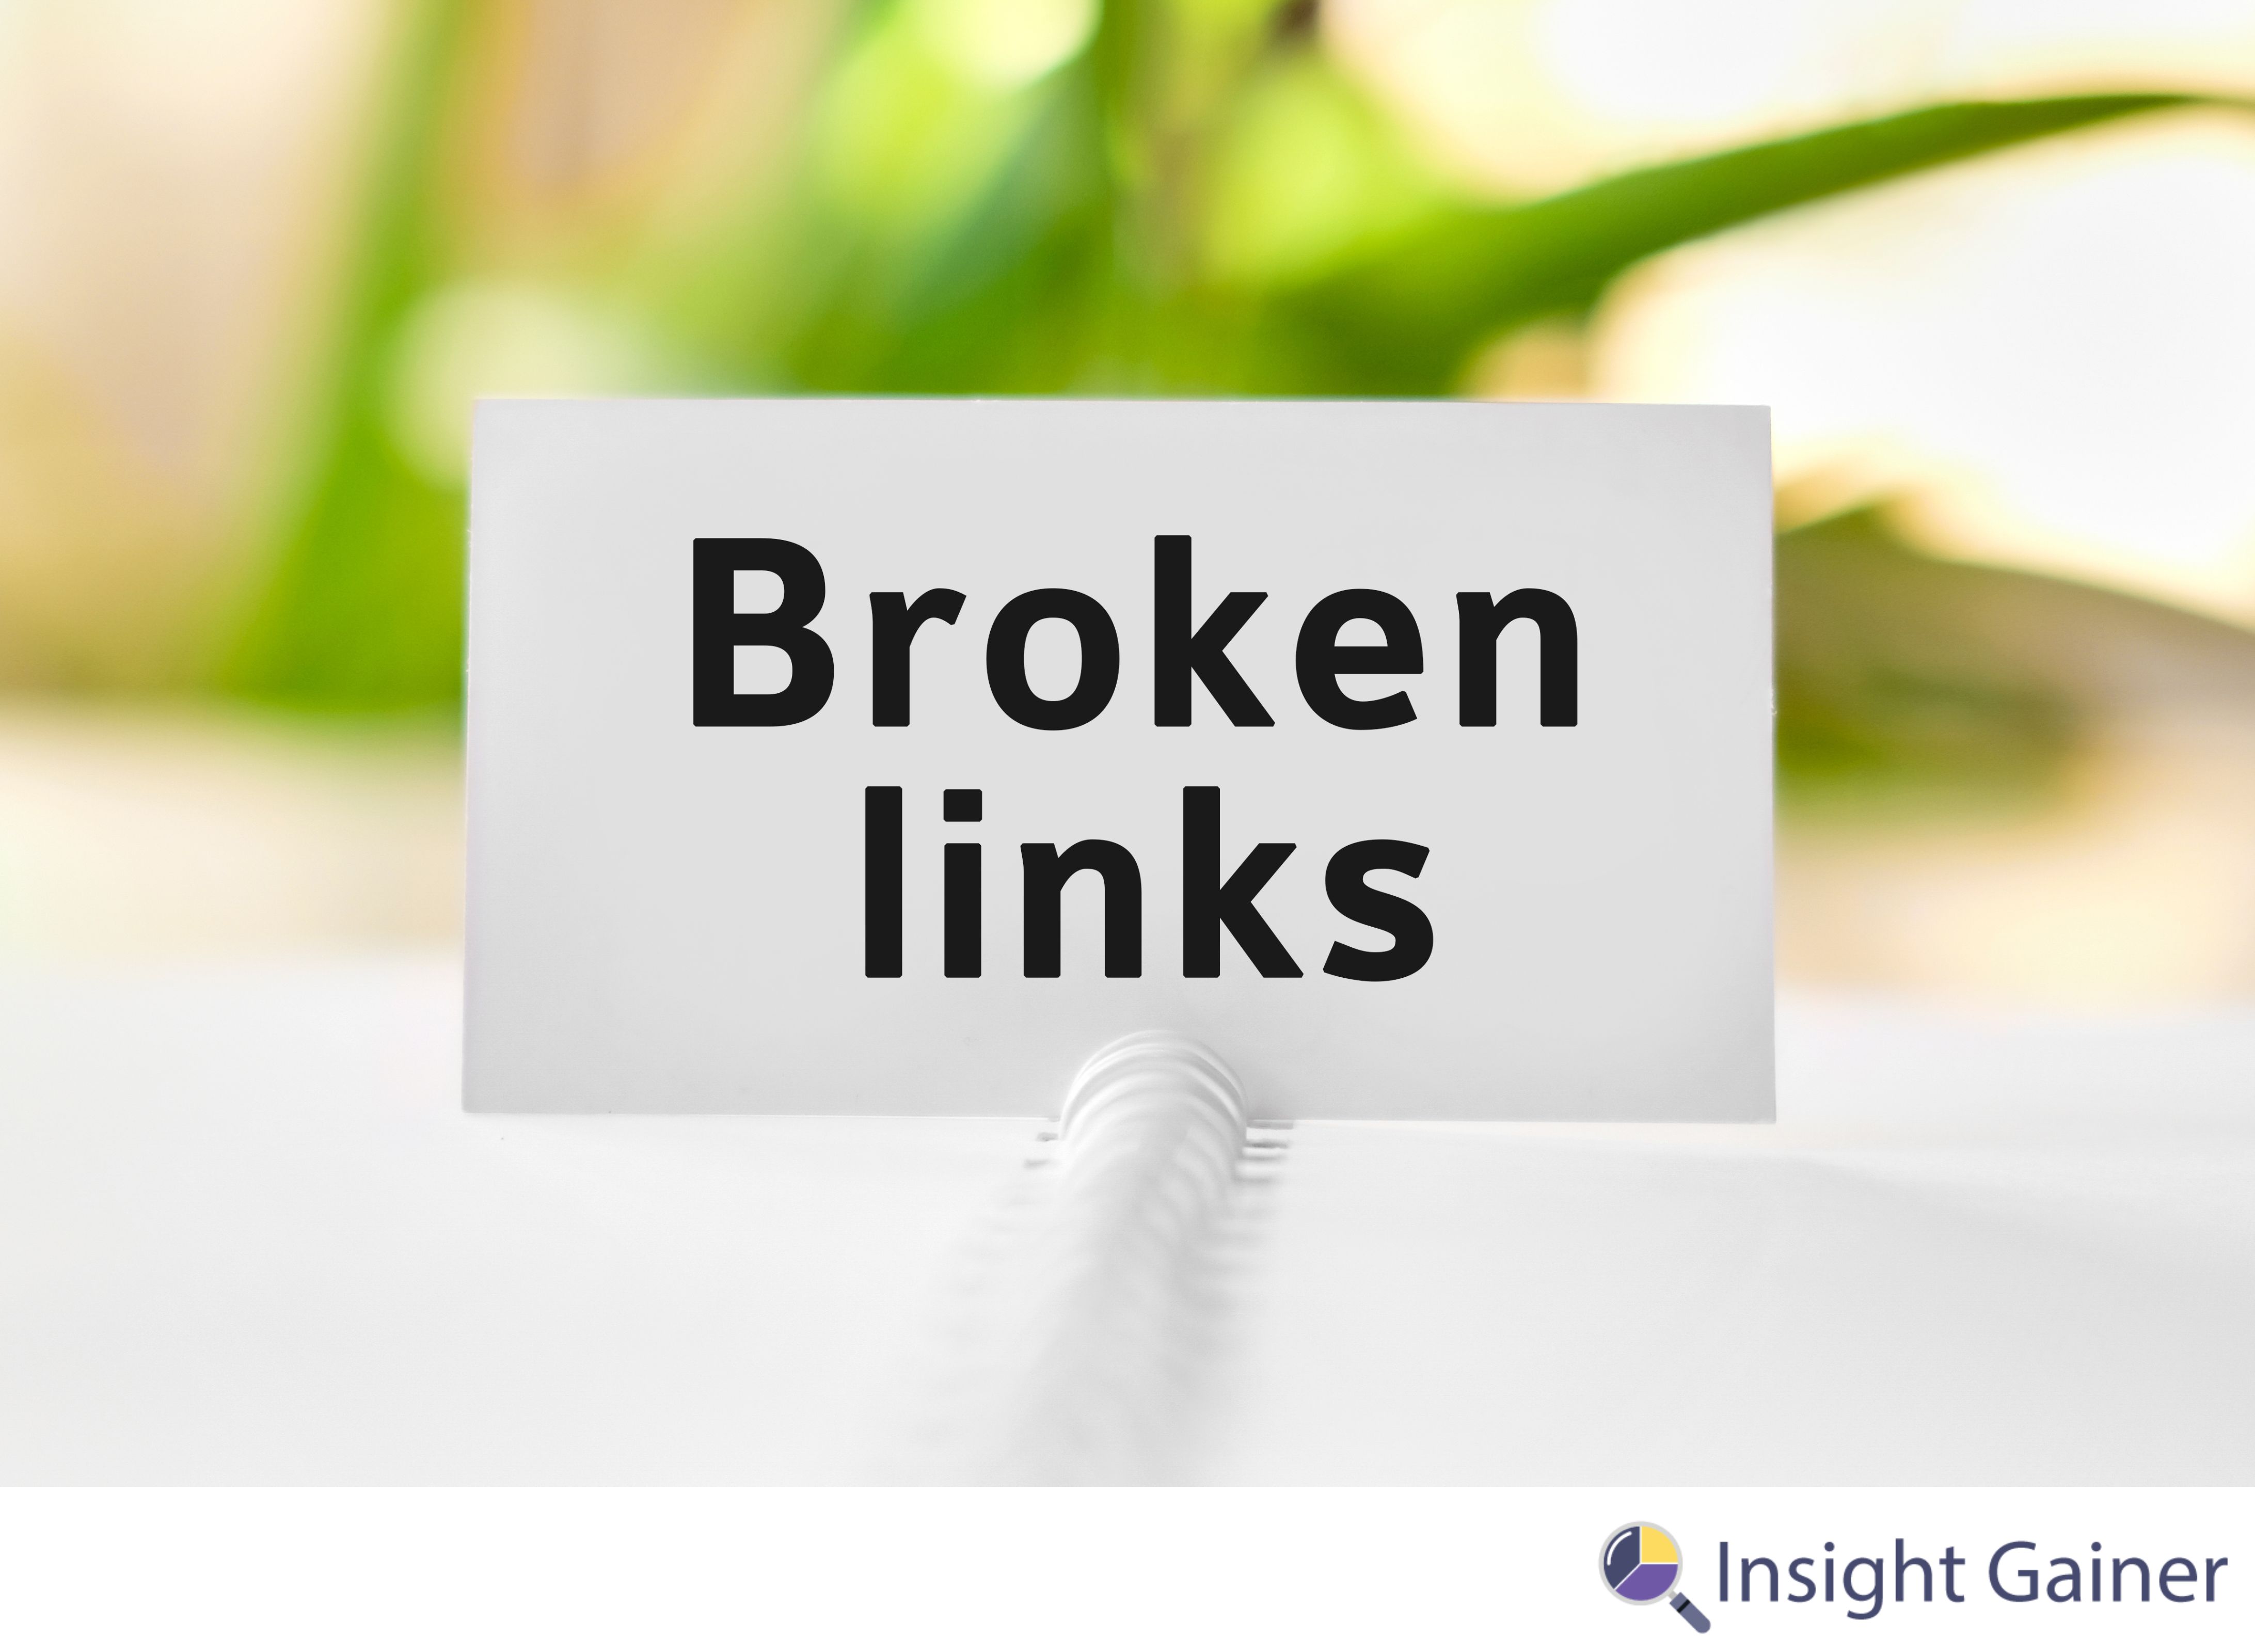 What does Broken links mean?